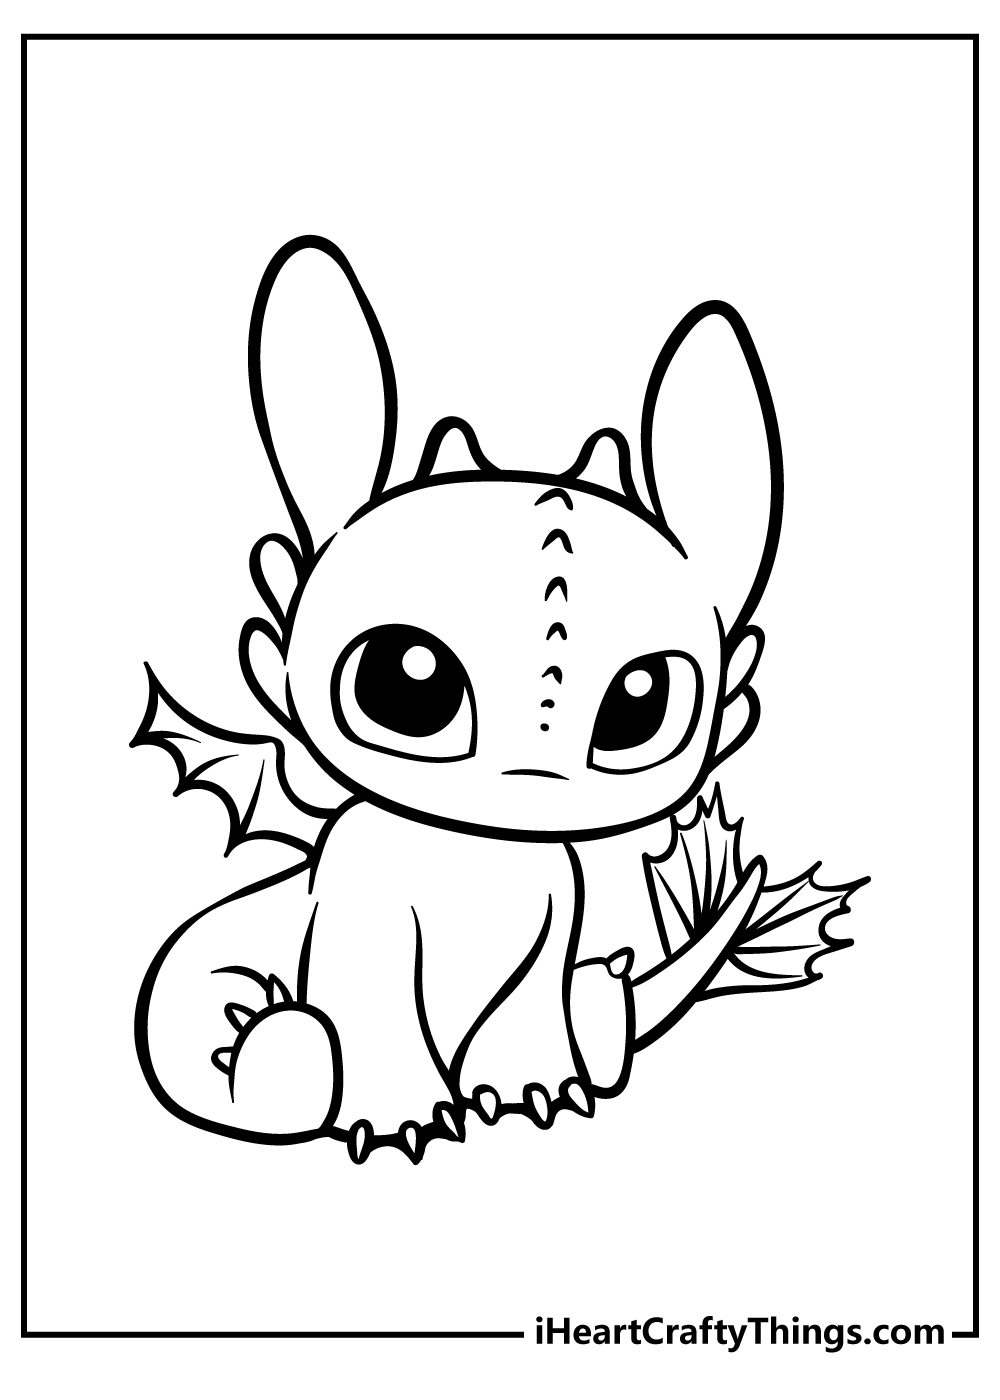 How To Train Your Dragon Coloring Pages for preschoolers free printable